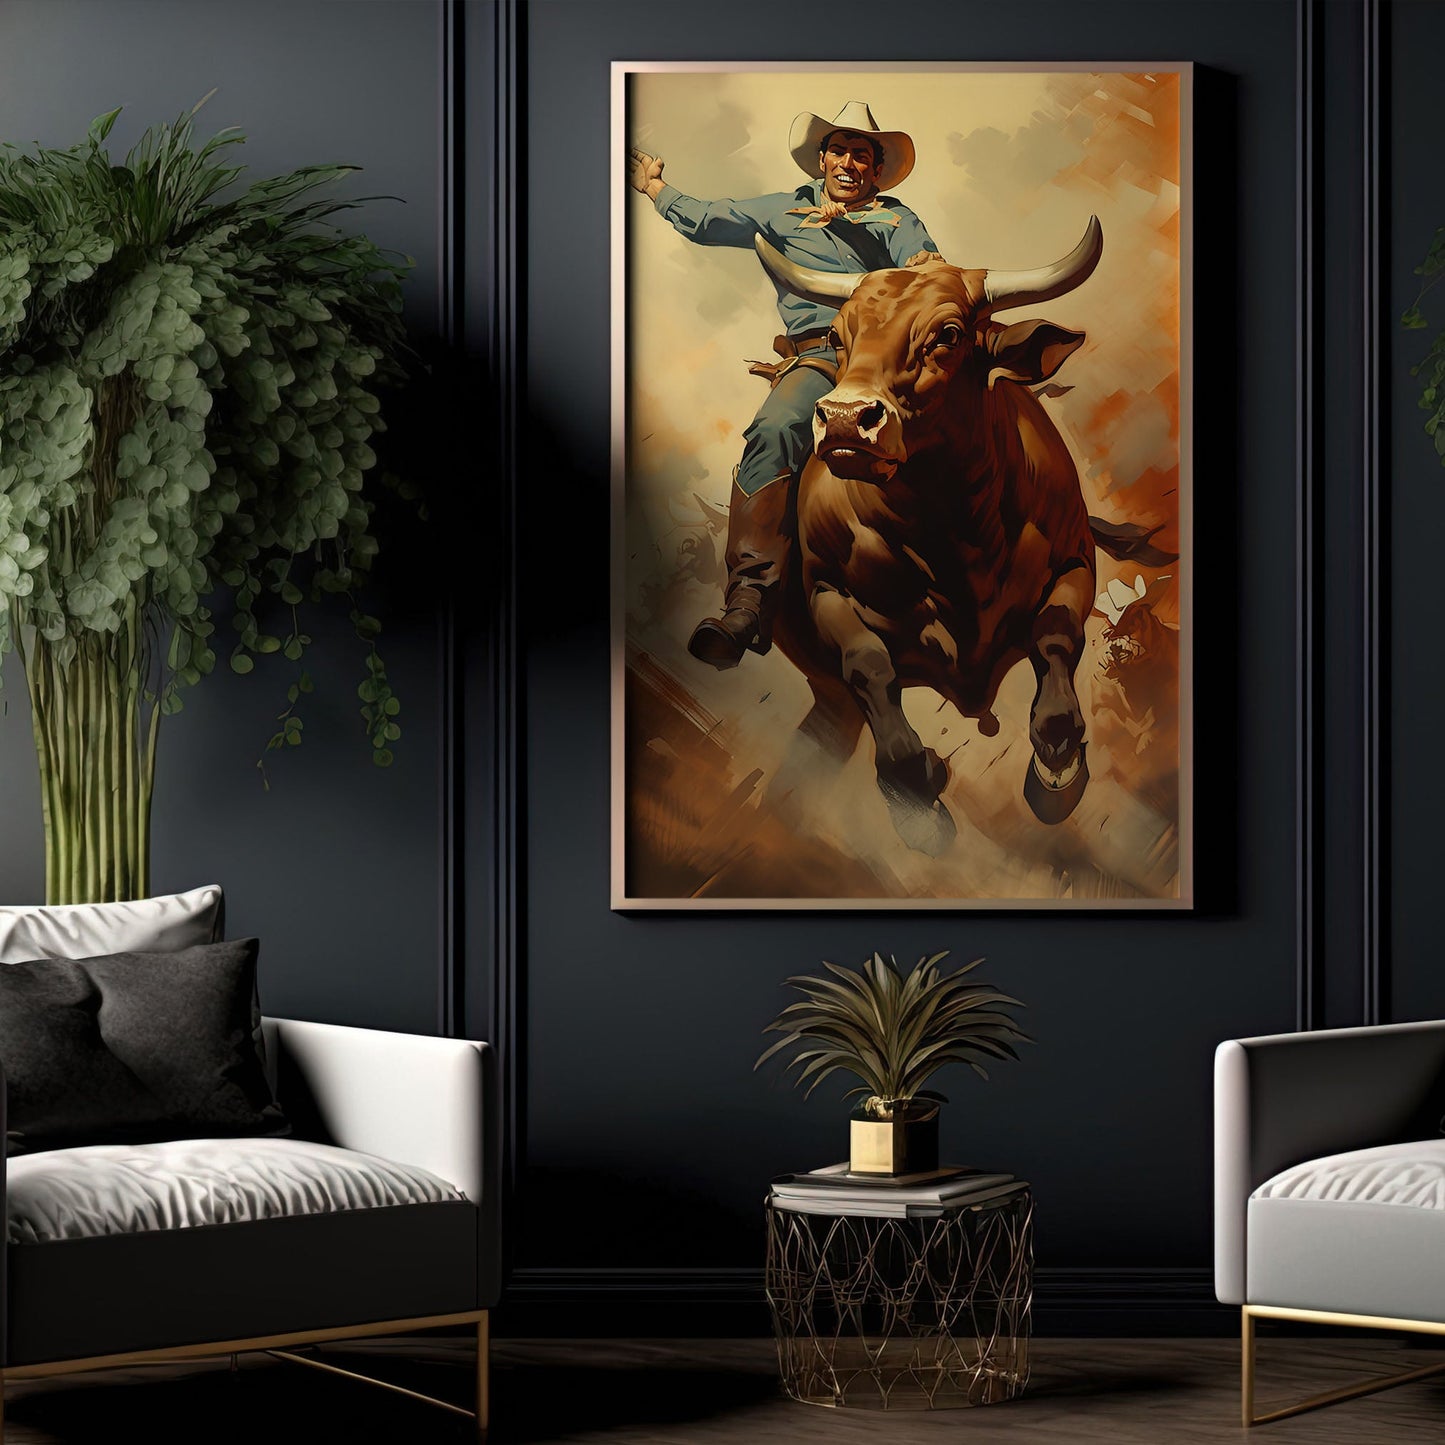 Rider’s Grit Canvas, Bull Riding Canvas Painting, Wall Art Decor - Bull Riding Poster Gift, Gift For Cowboy Lovers